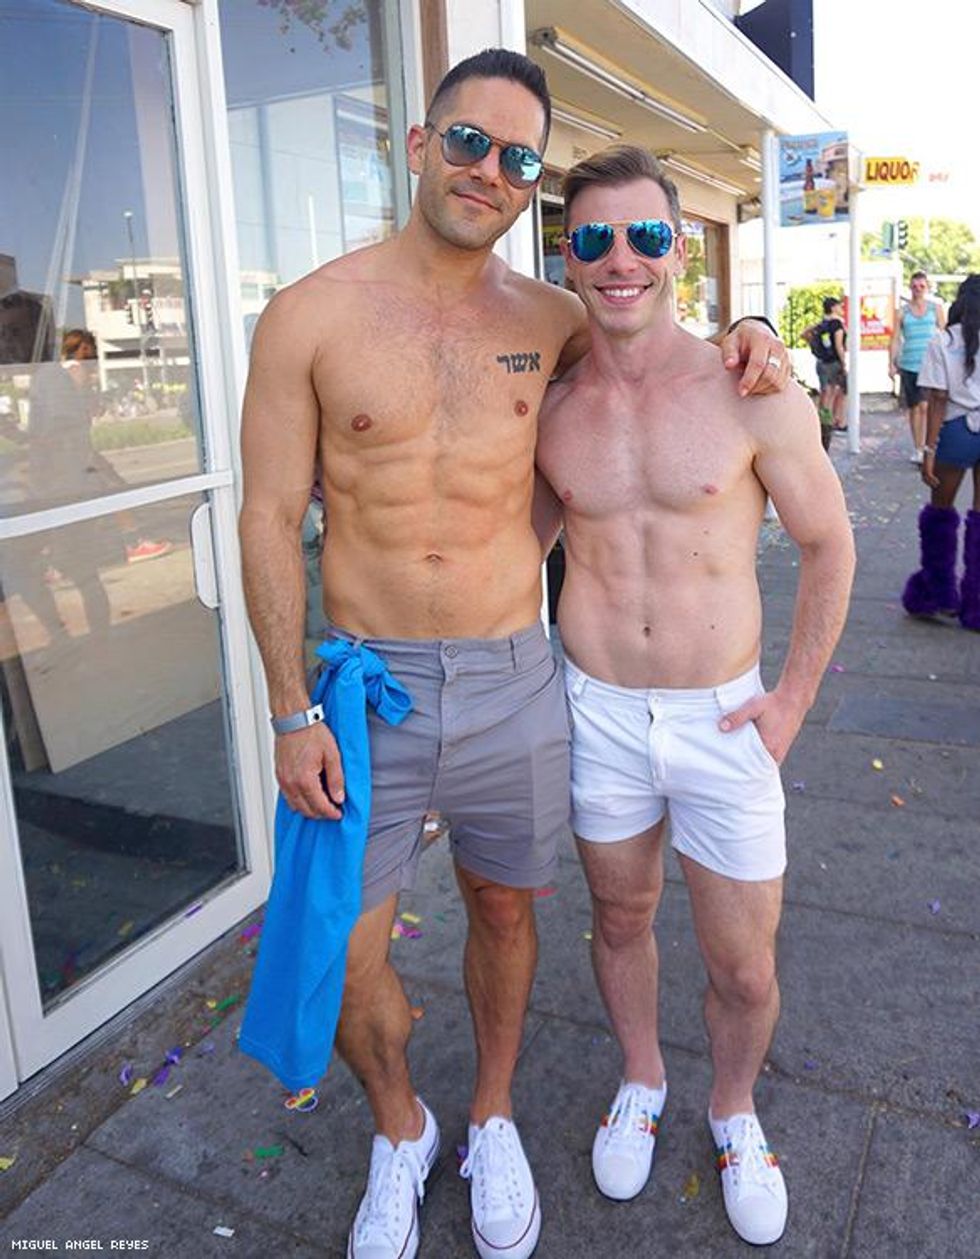 110 Dazzling and Thirst-Quenching L.A. Pride Photos